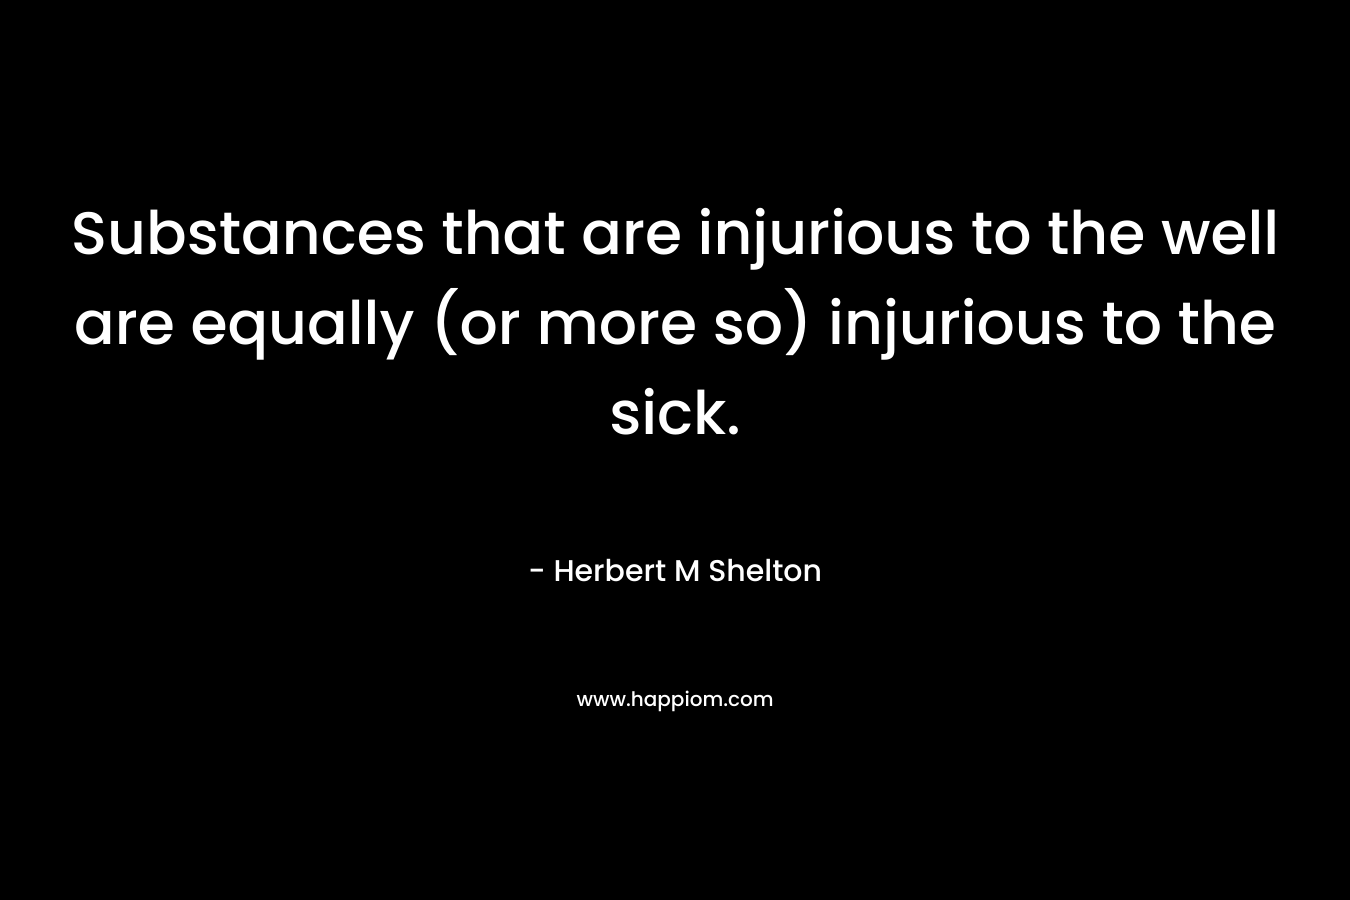 Substances that are injurious to the well are equally (or more so) injurious to the sick.